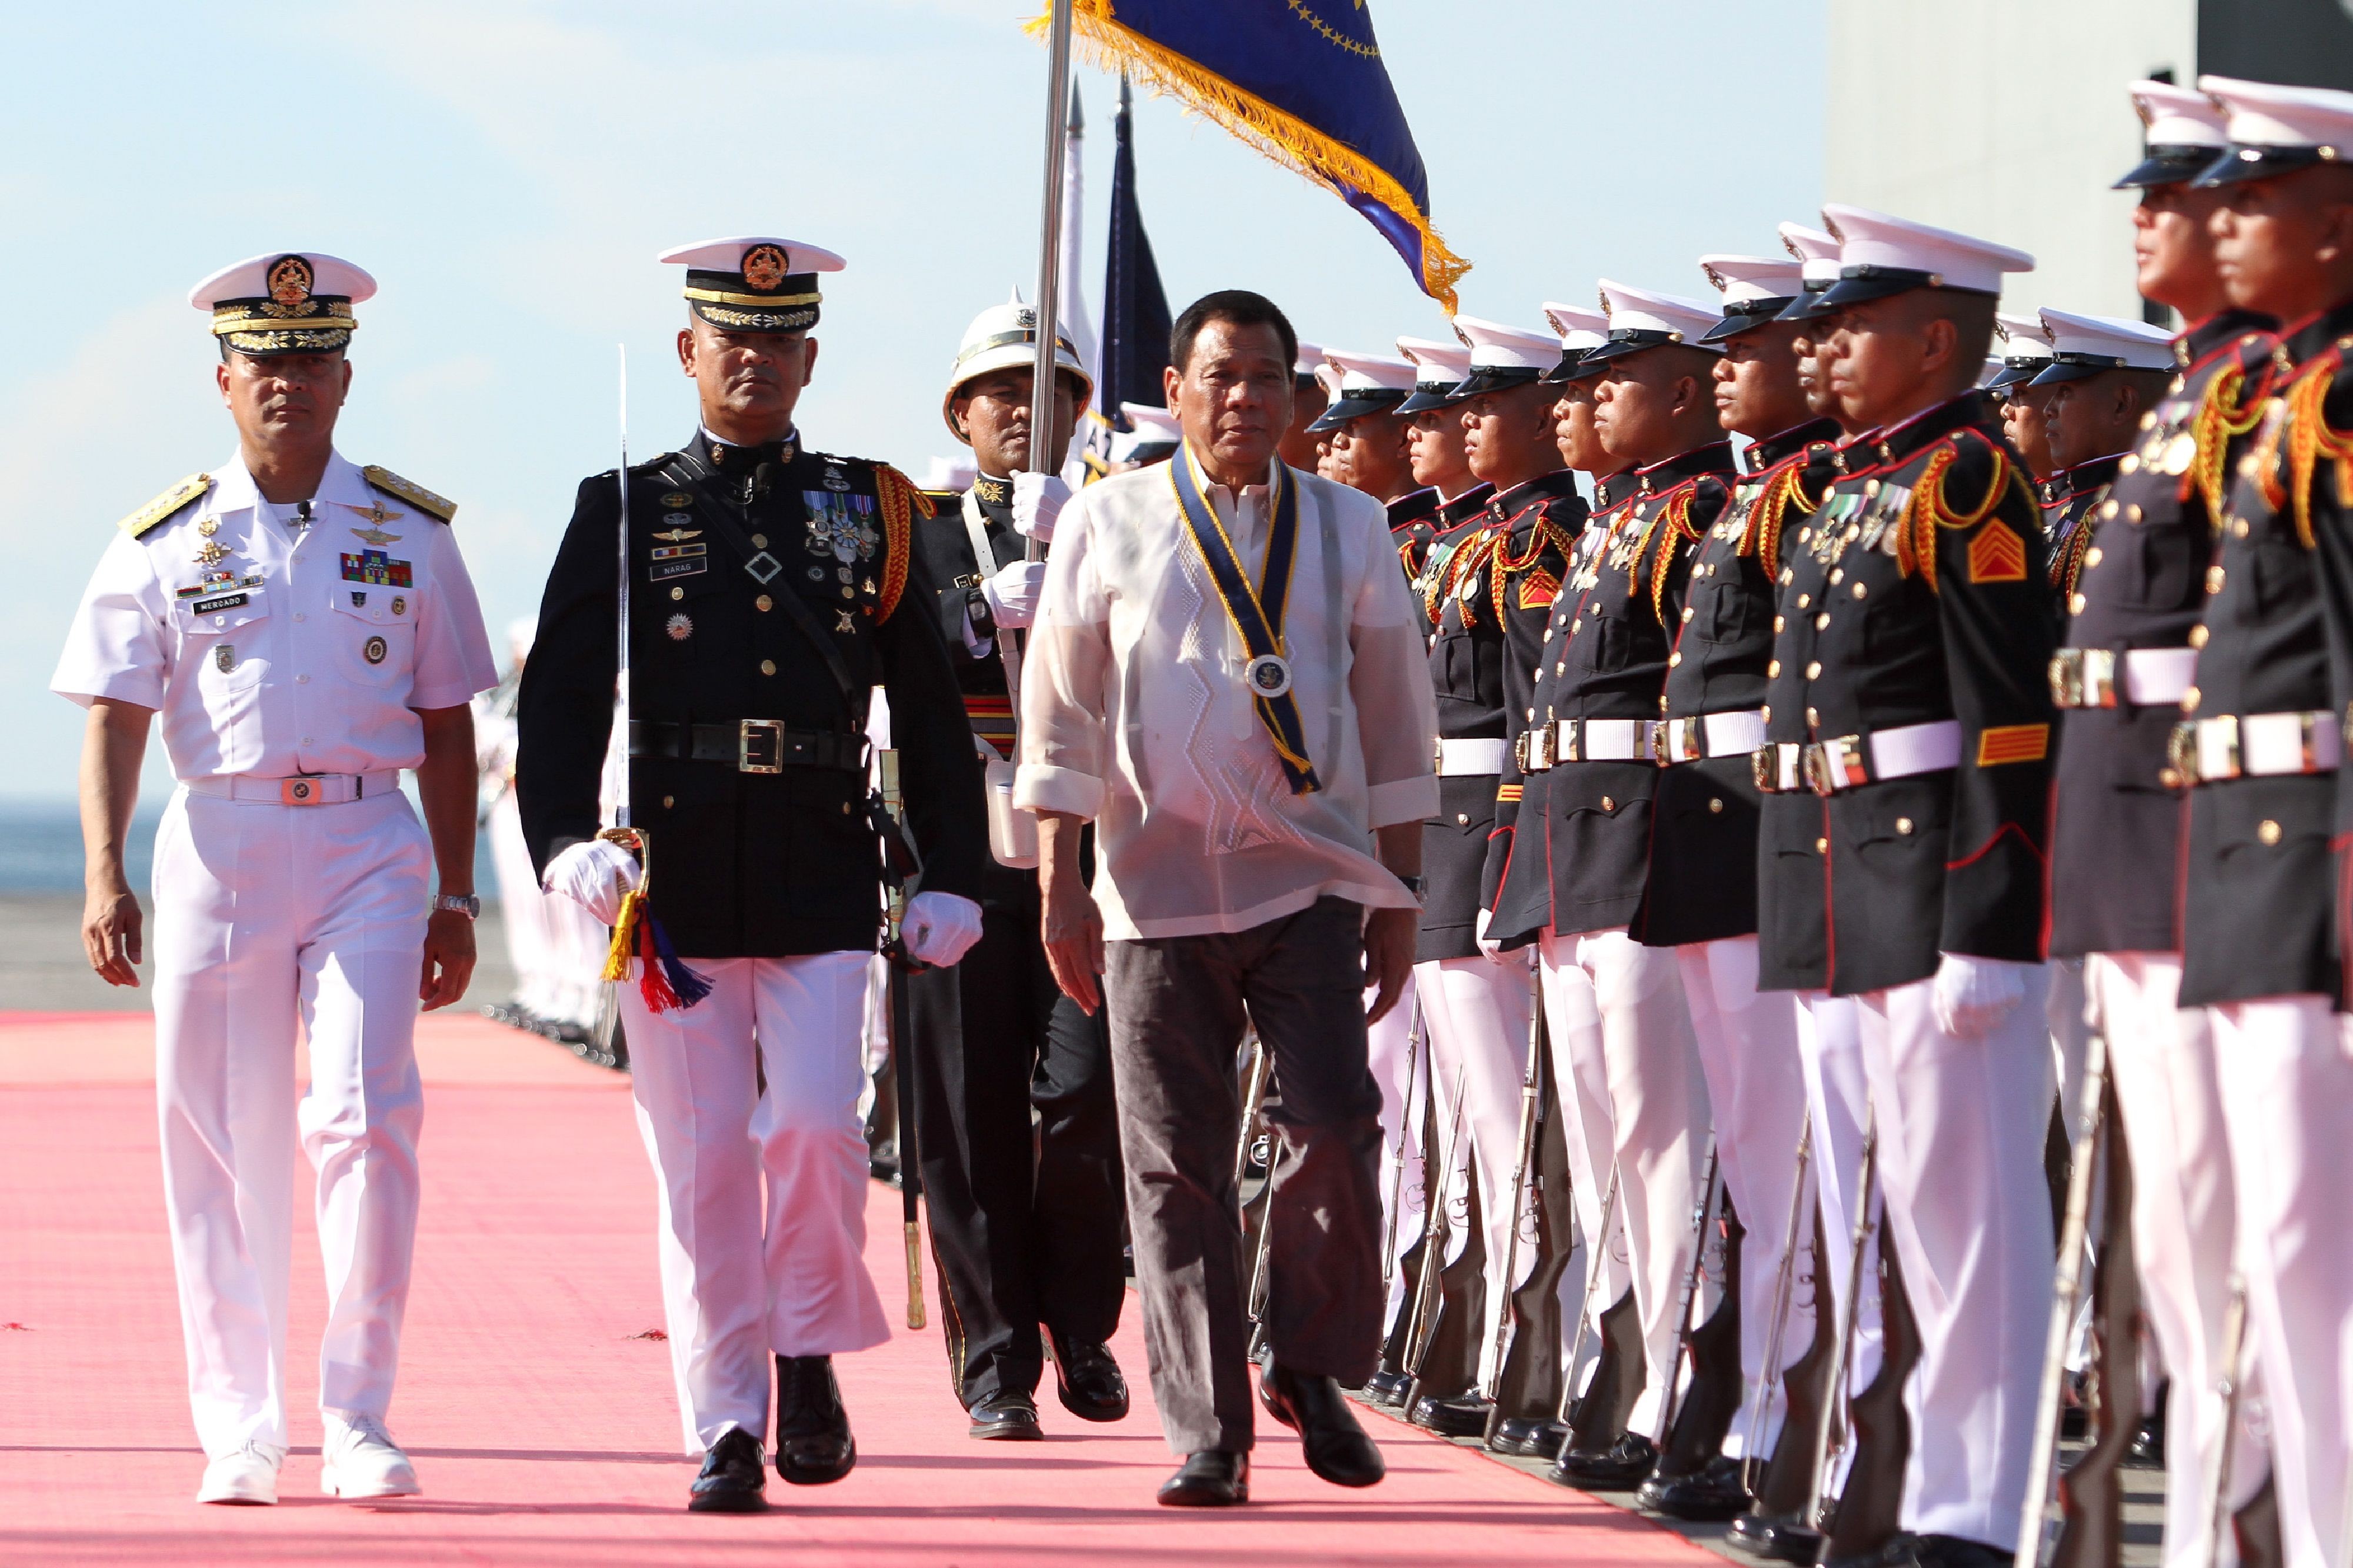 President Rodrigo Duterte inspects an honour guard as he attends celebrations for the 119th anniversary of the Philippine Navy in Davao, Mindanao, on May 31. Duterte imposed martial law in Mindanao on May 23. Photo: AFP